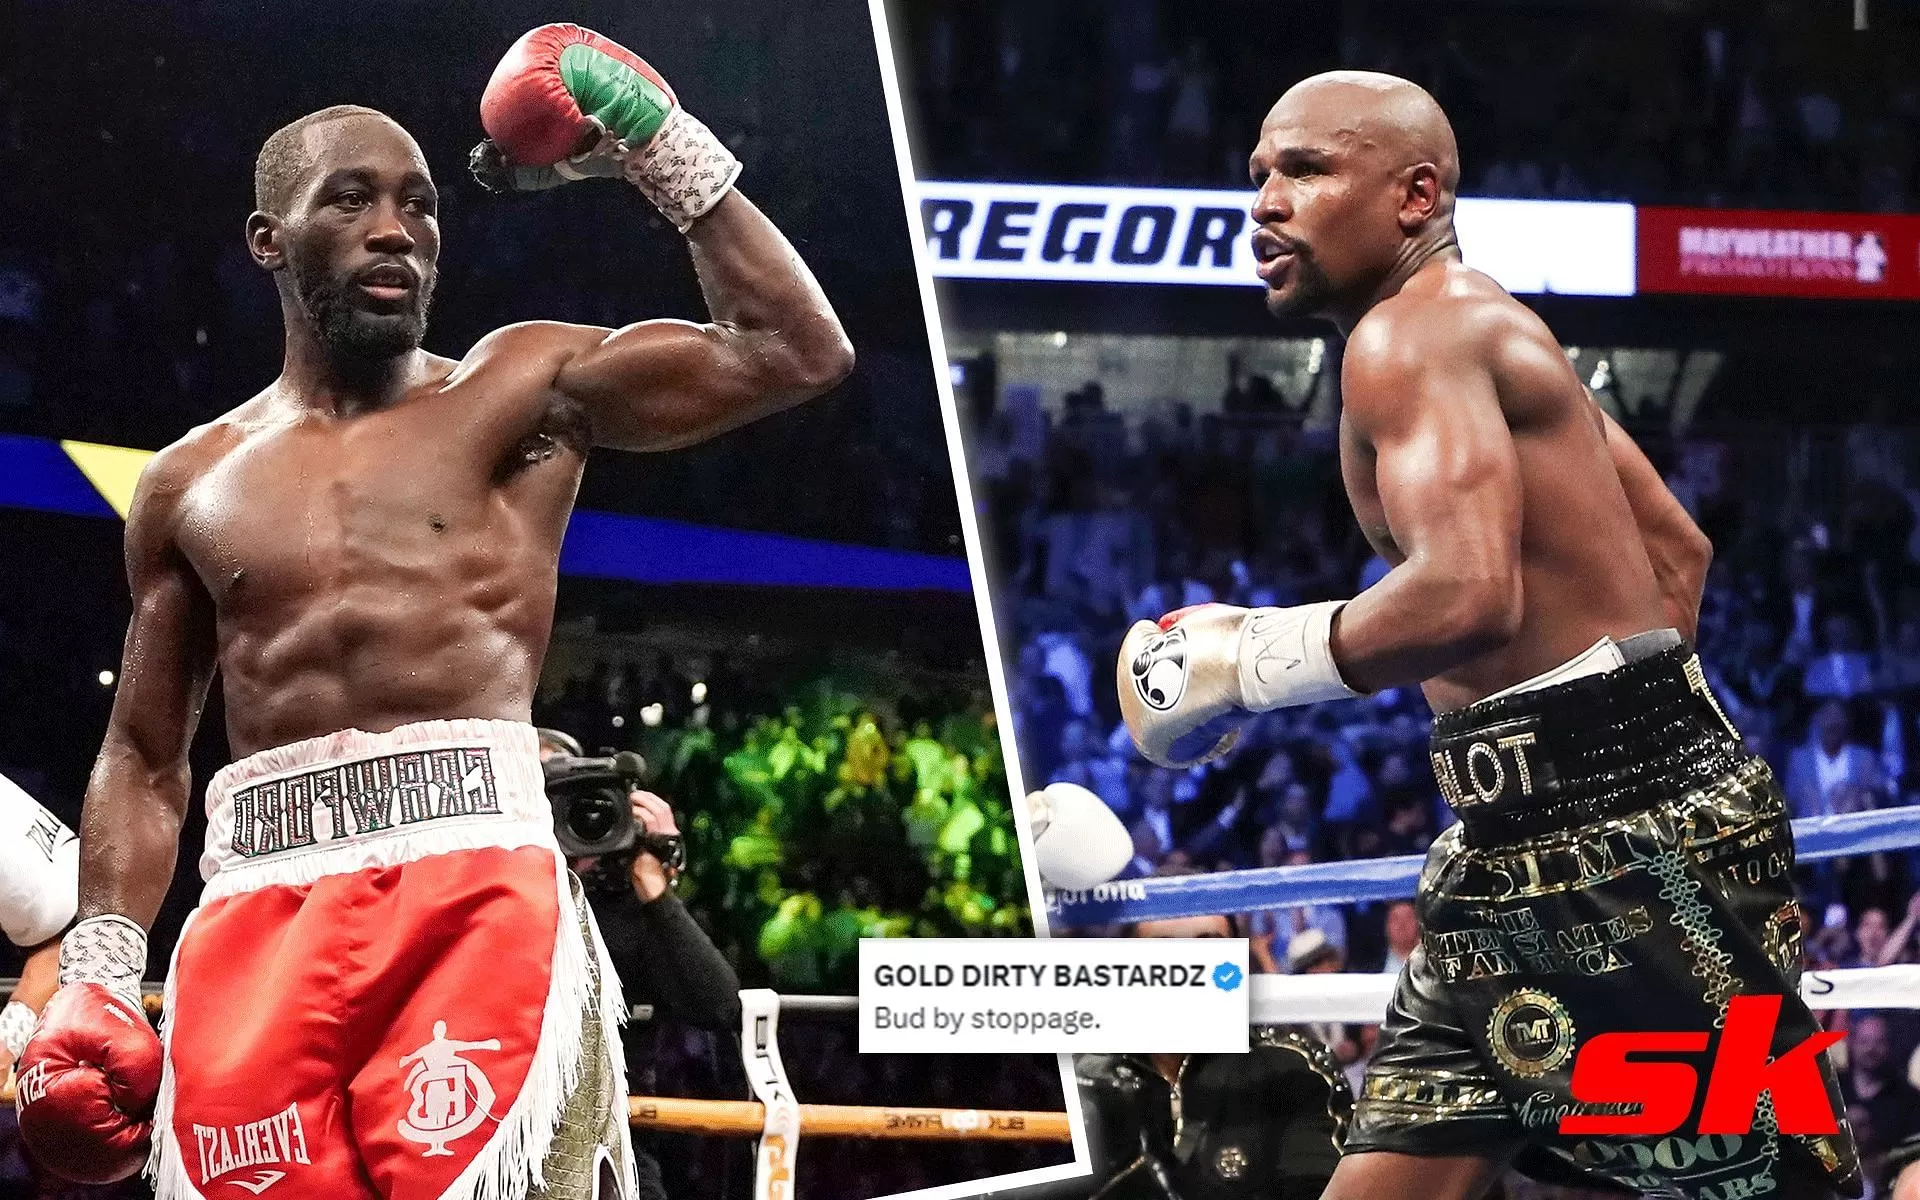 Floyd Mayweather: Terence Crawford vs. prime Floyd Mayweather - Who wins?  Raging debate splits boxing Twitter with polarized opinions